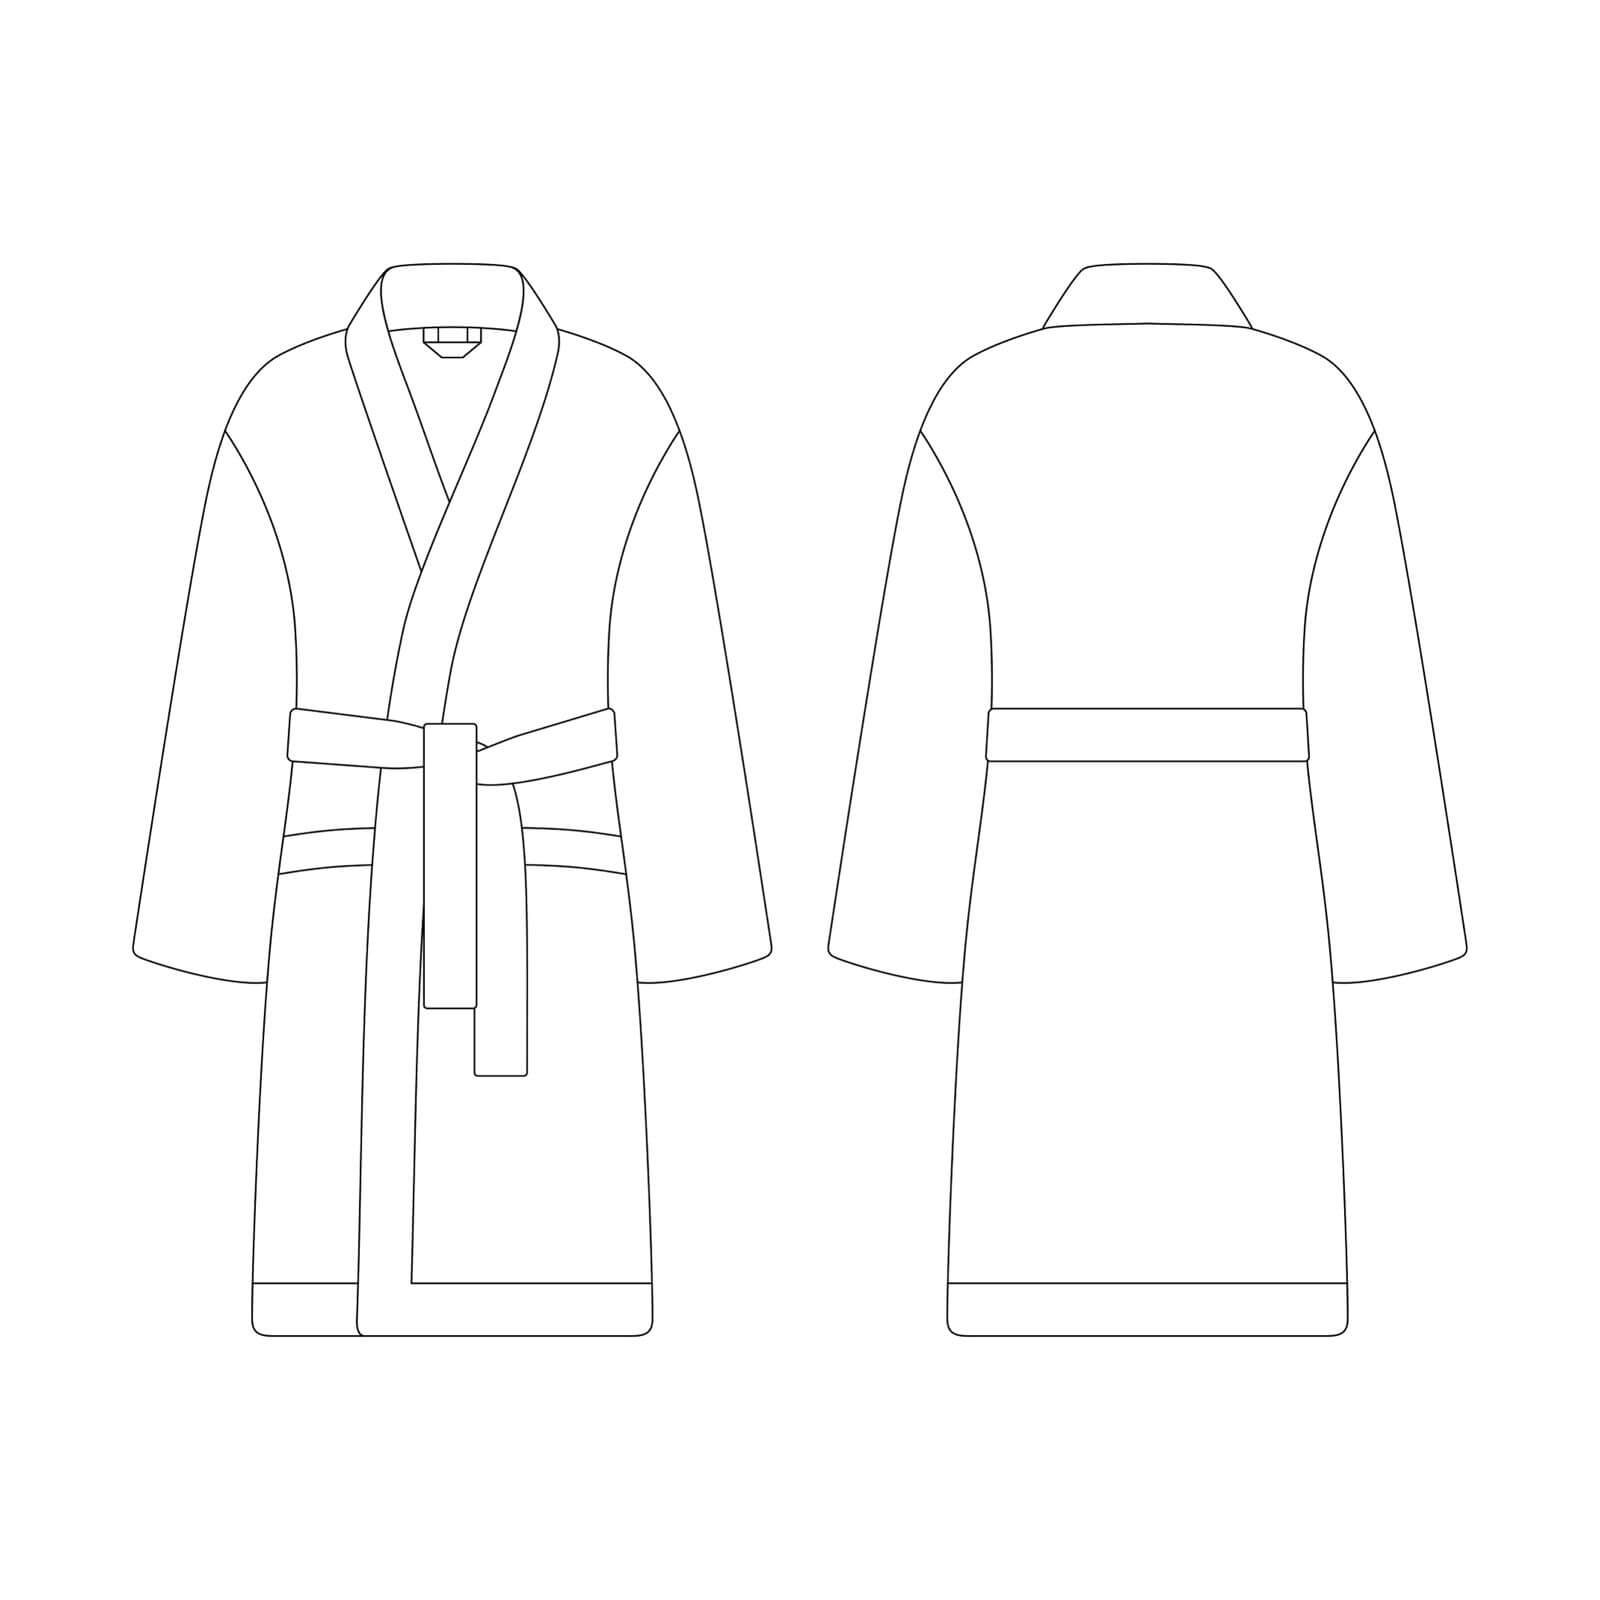 Please contact us for bathrobe manufacture.